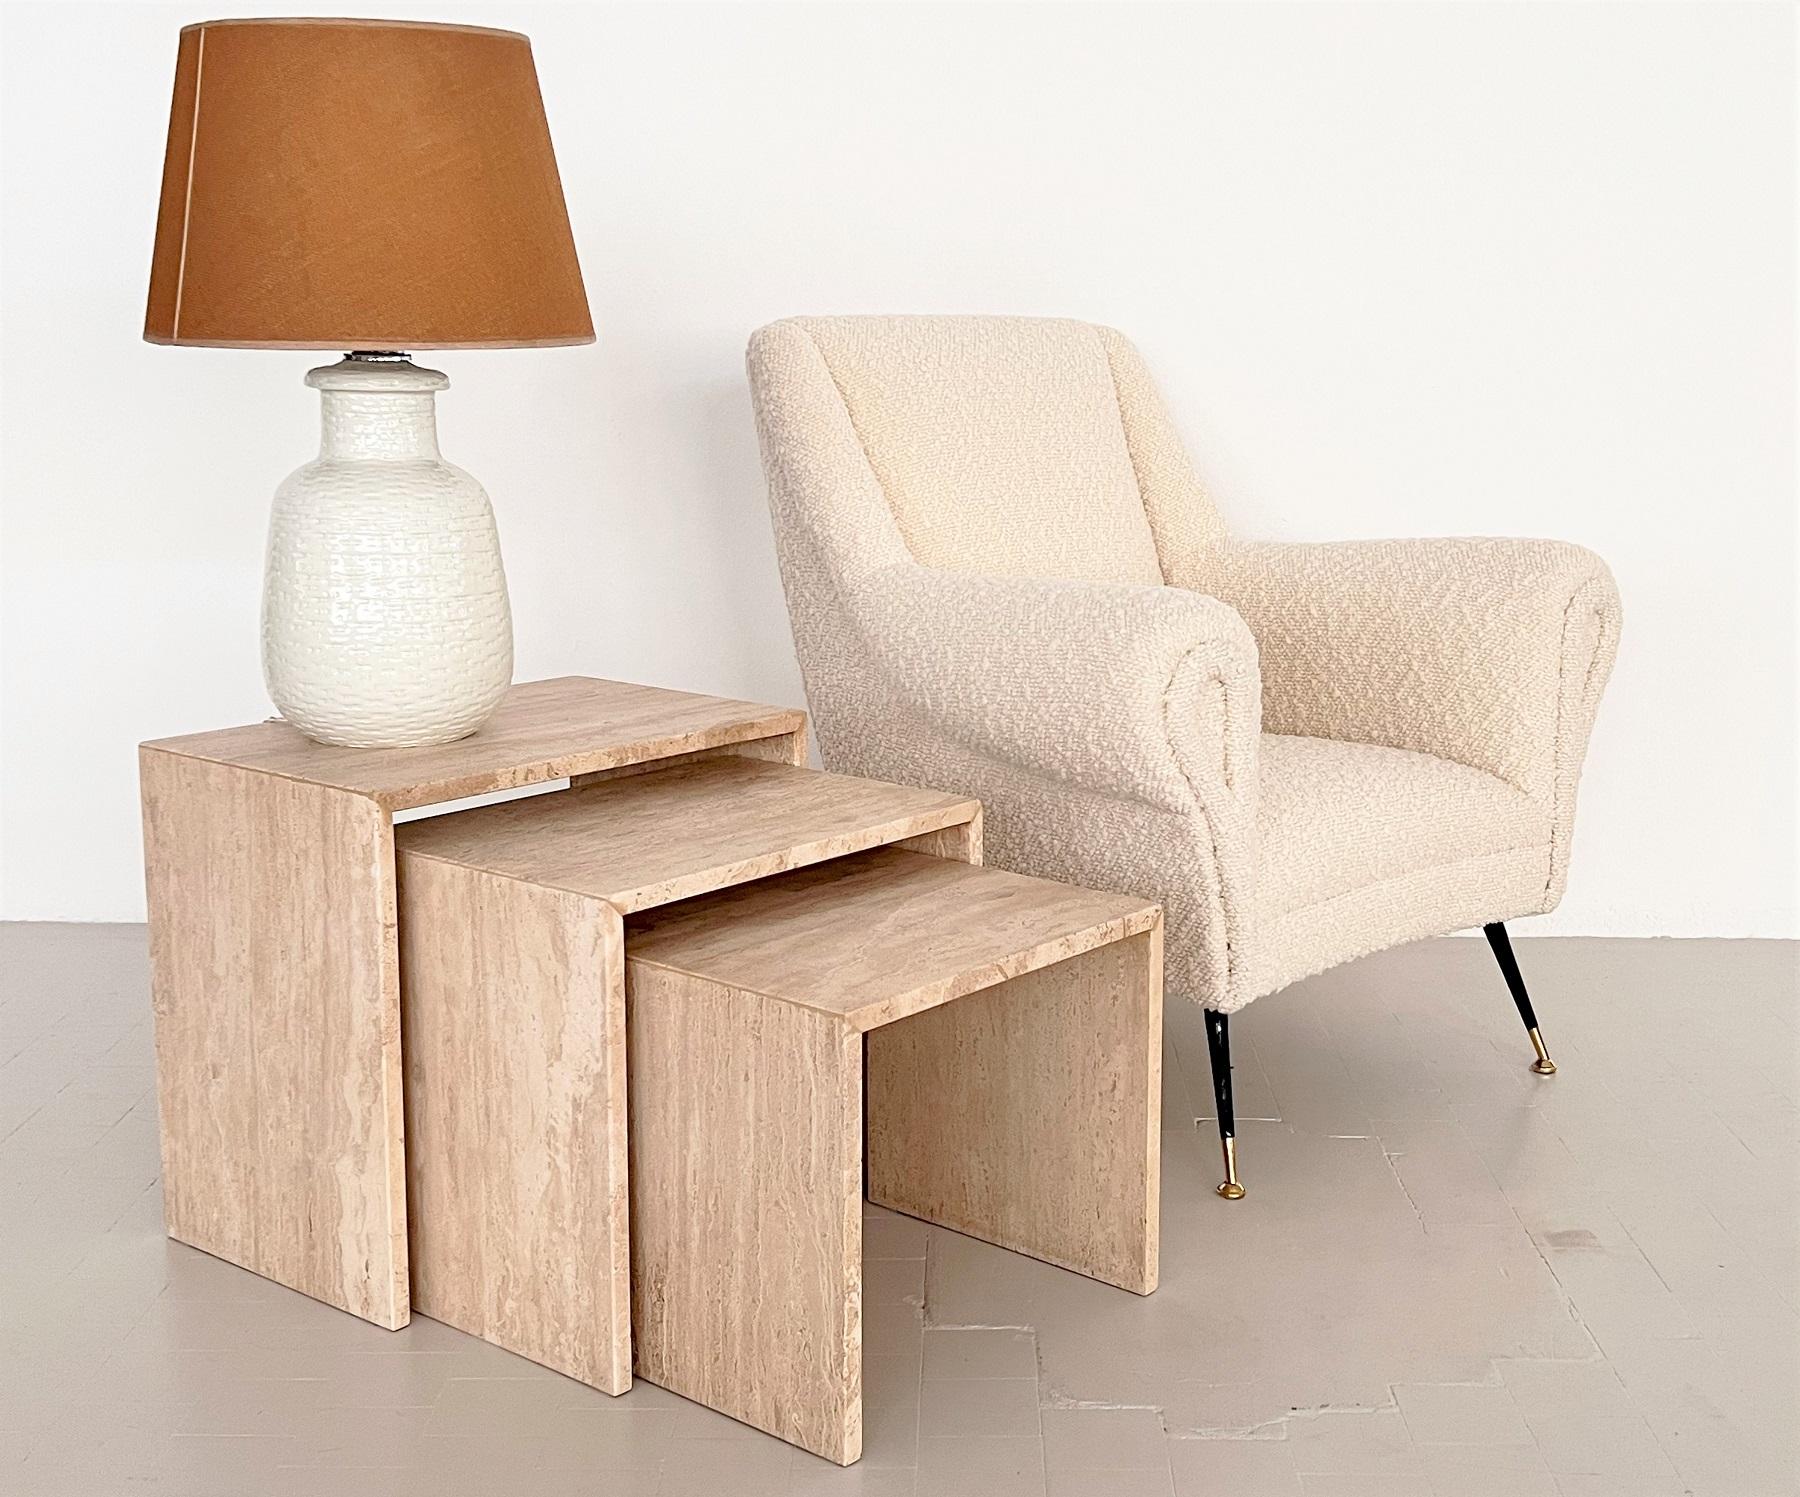 Beautiful set of three elegant nesting tables of three different sizes in order to be put one below the other.
Hand-Crafted in Italy in the 1970s of full Travertine of very elegant minimal appearance.
The Travertine has a beautiful stone pattern and